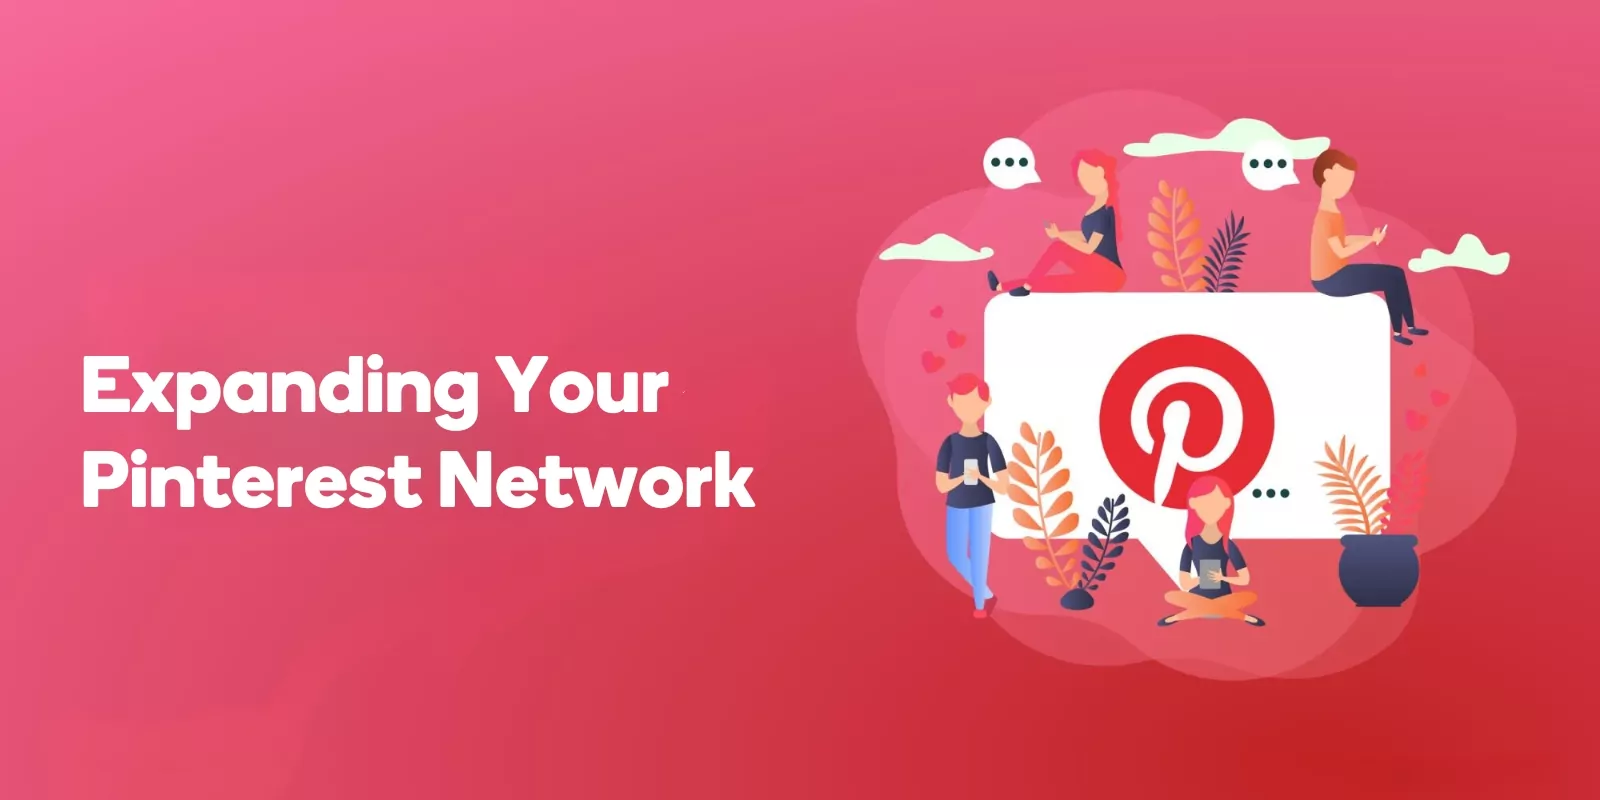 Expanding Your Pinterest Network